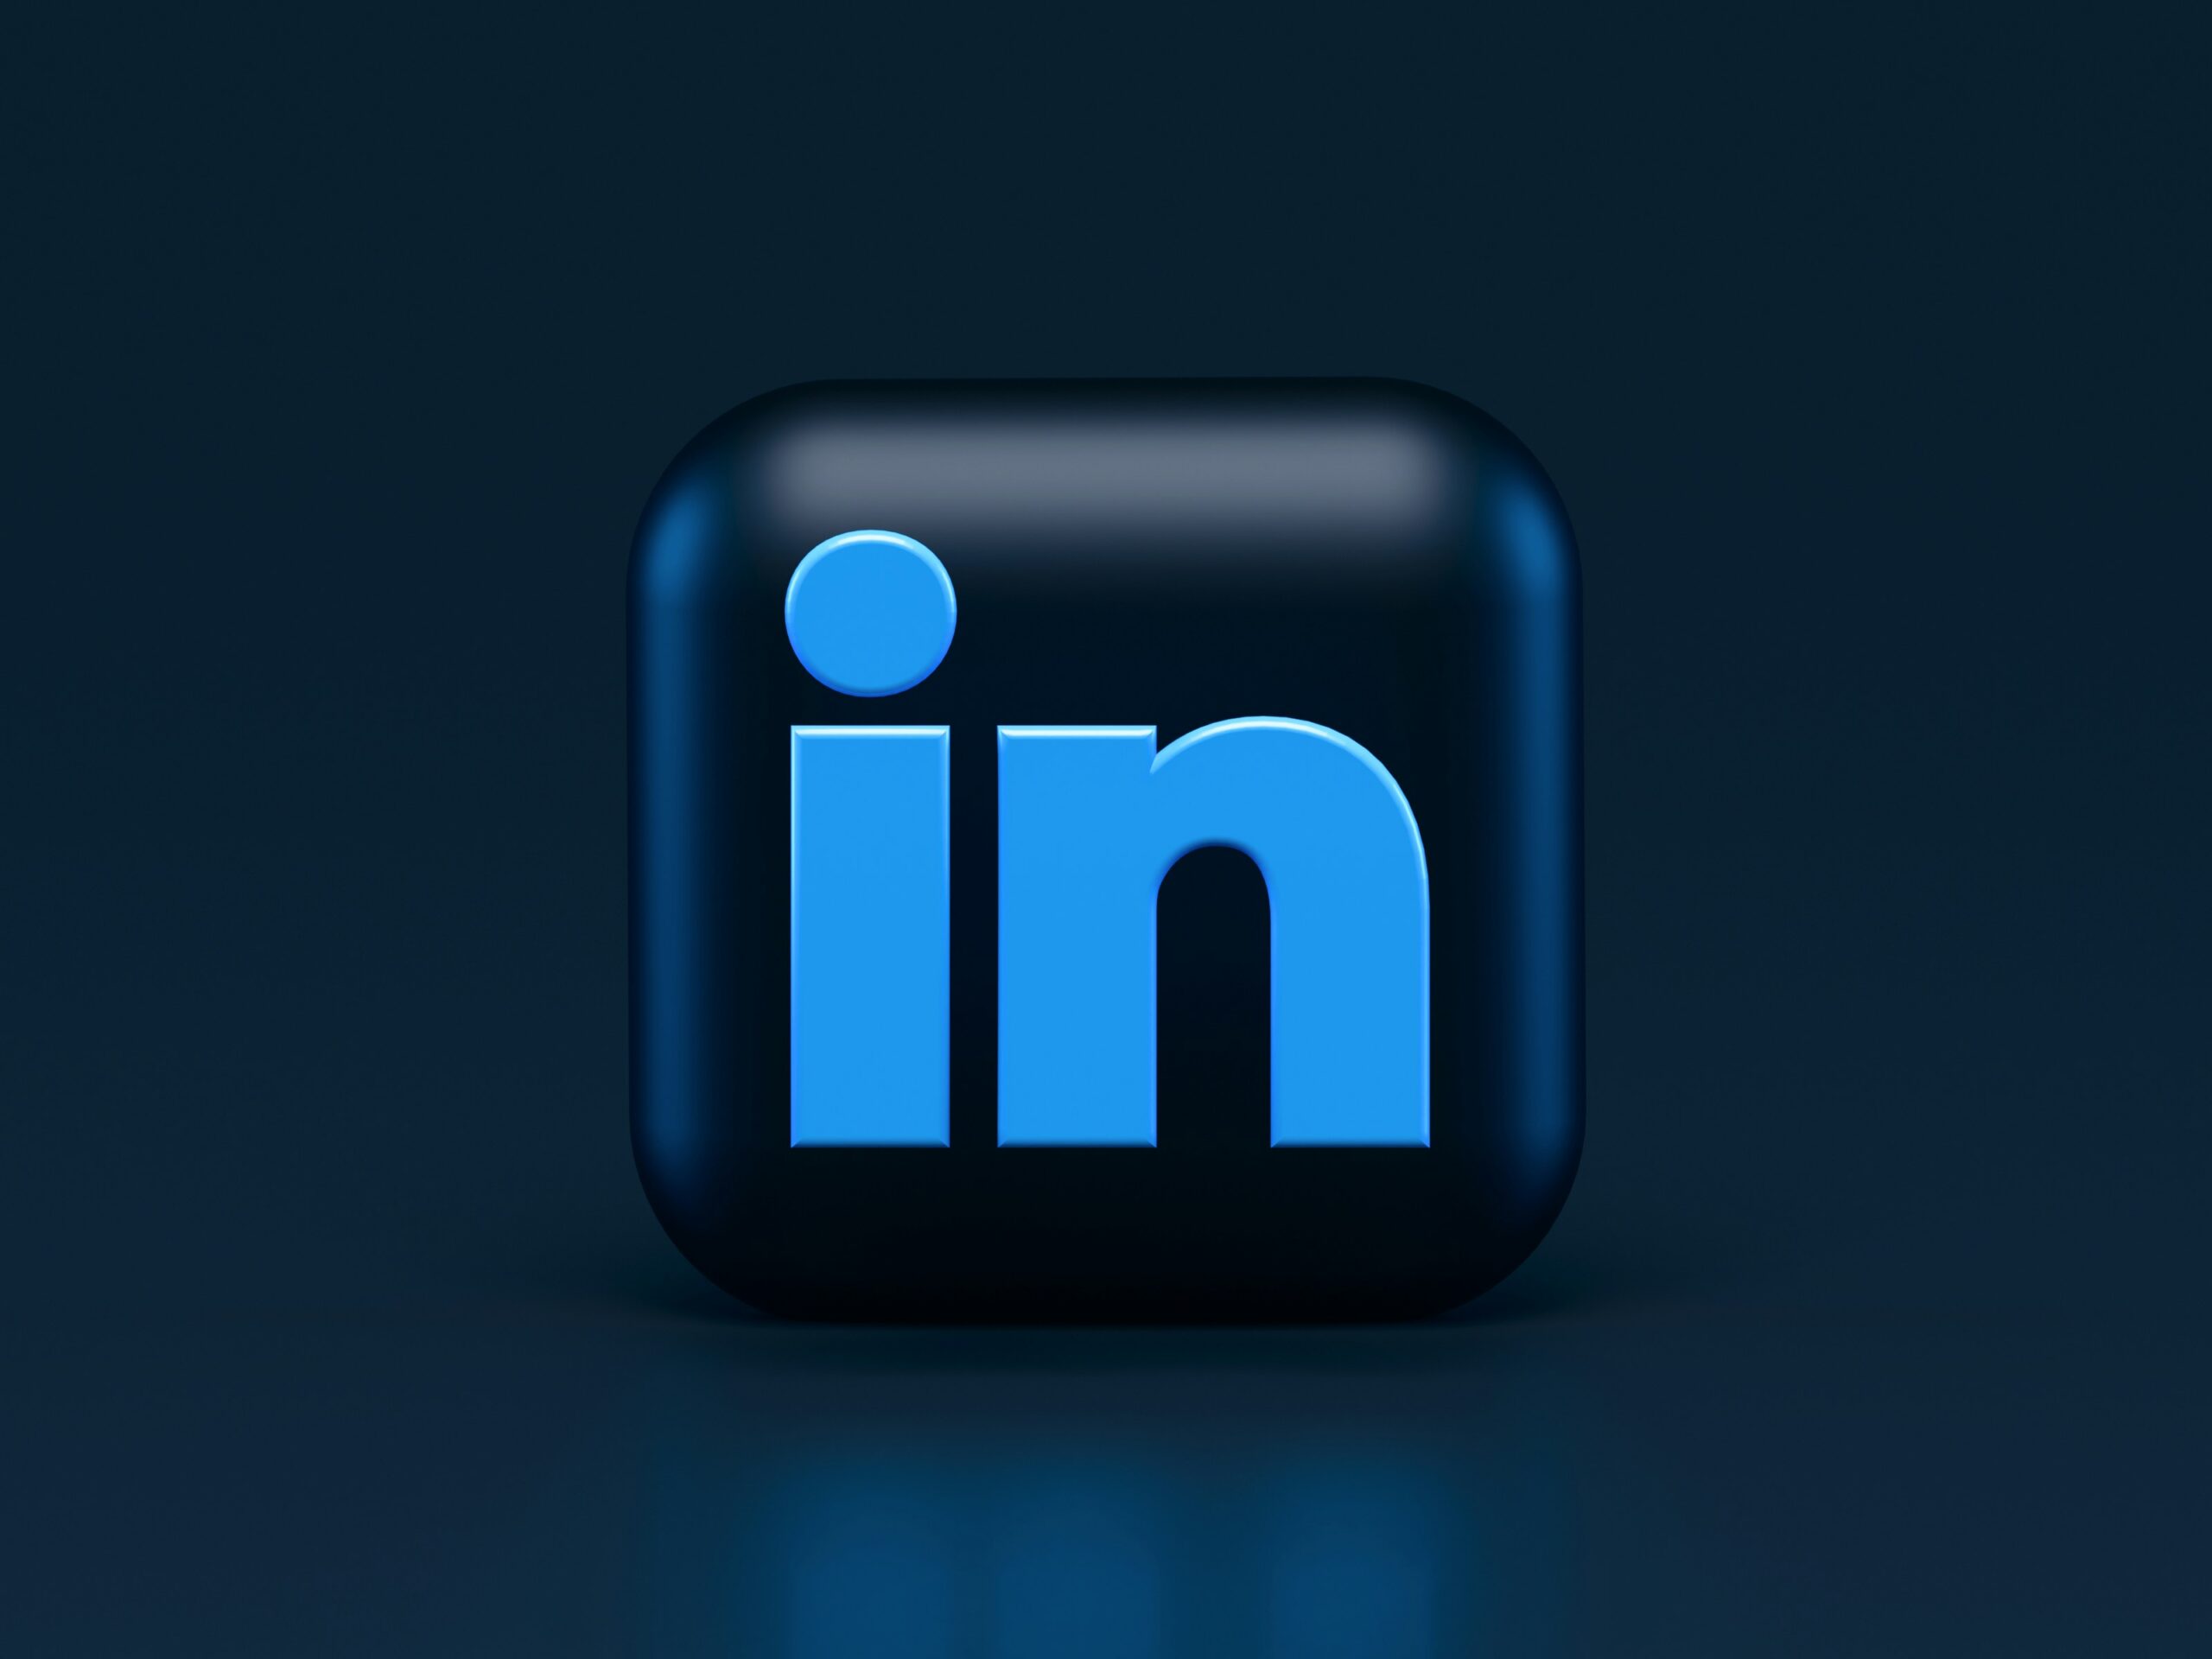 3D LinkedIn logo with a blue and black background.